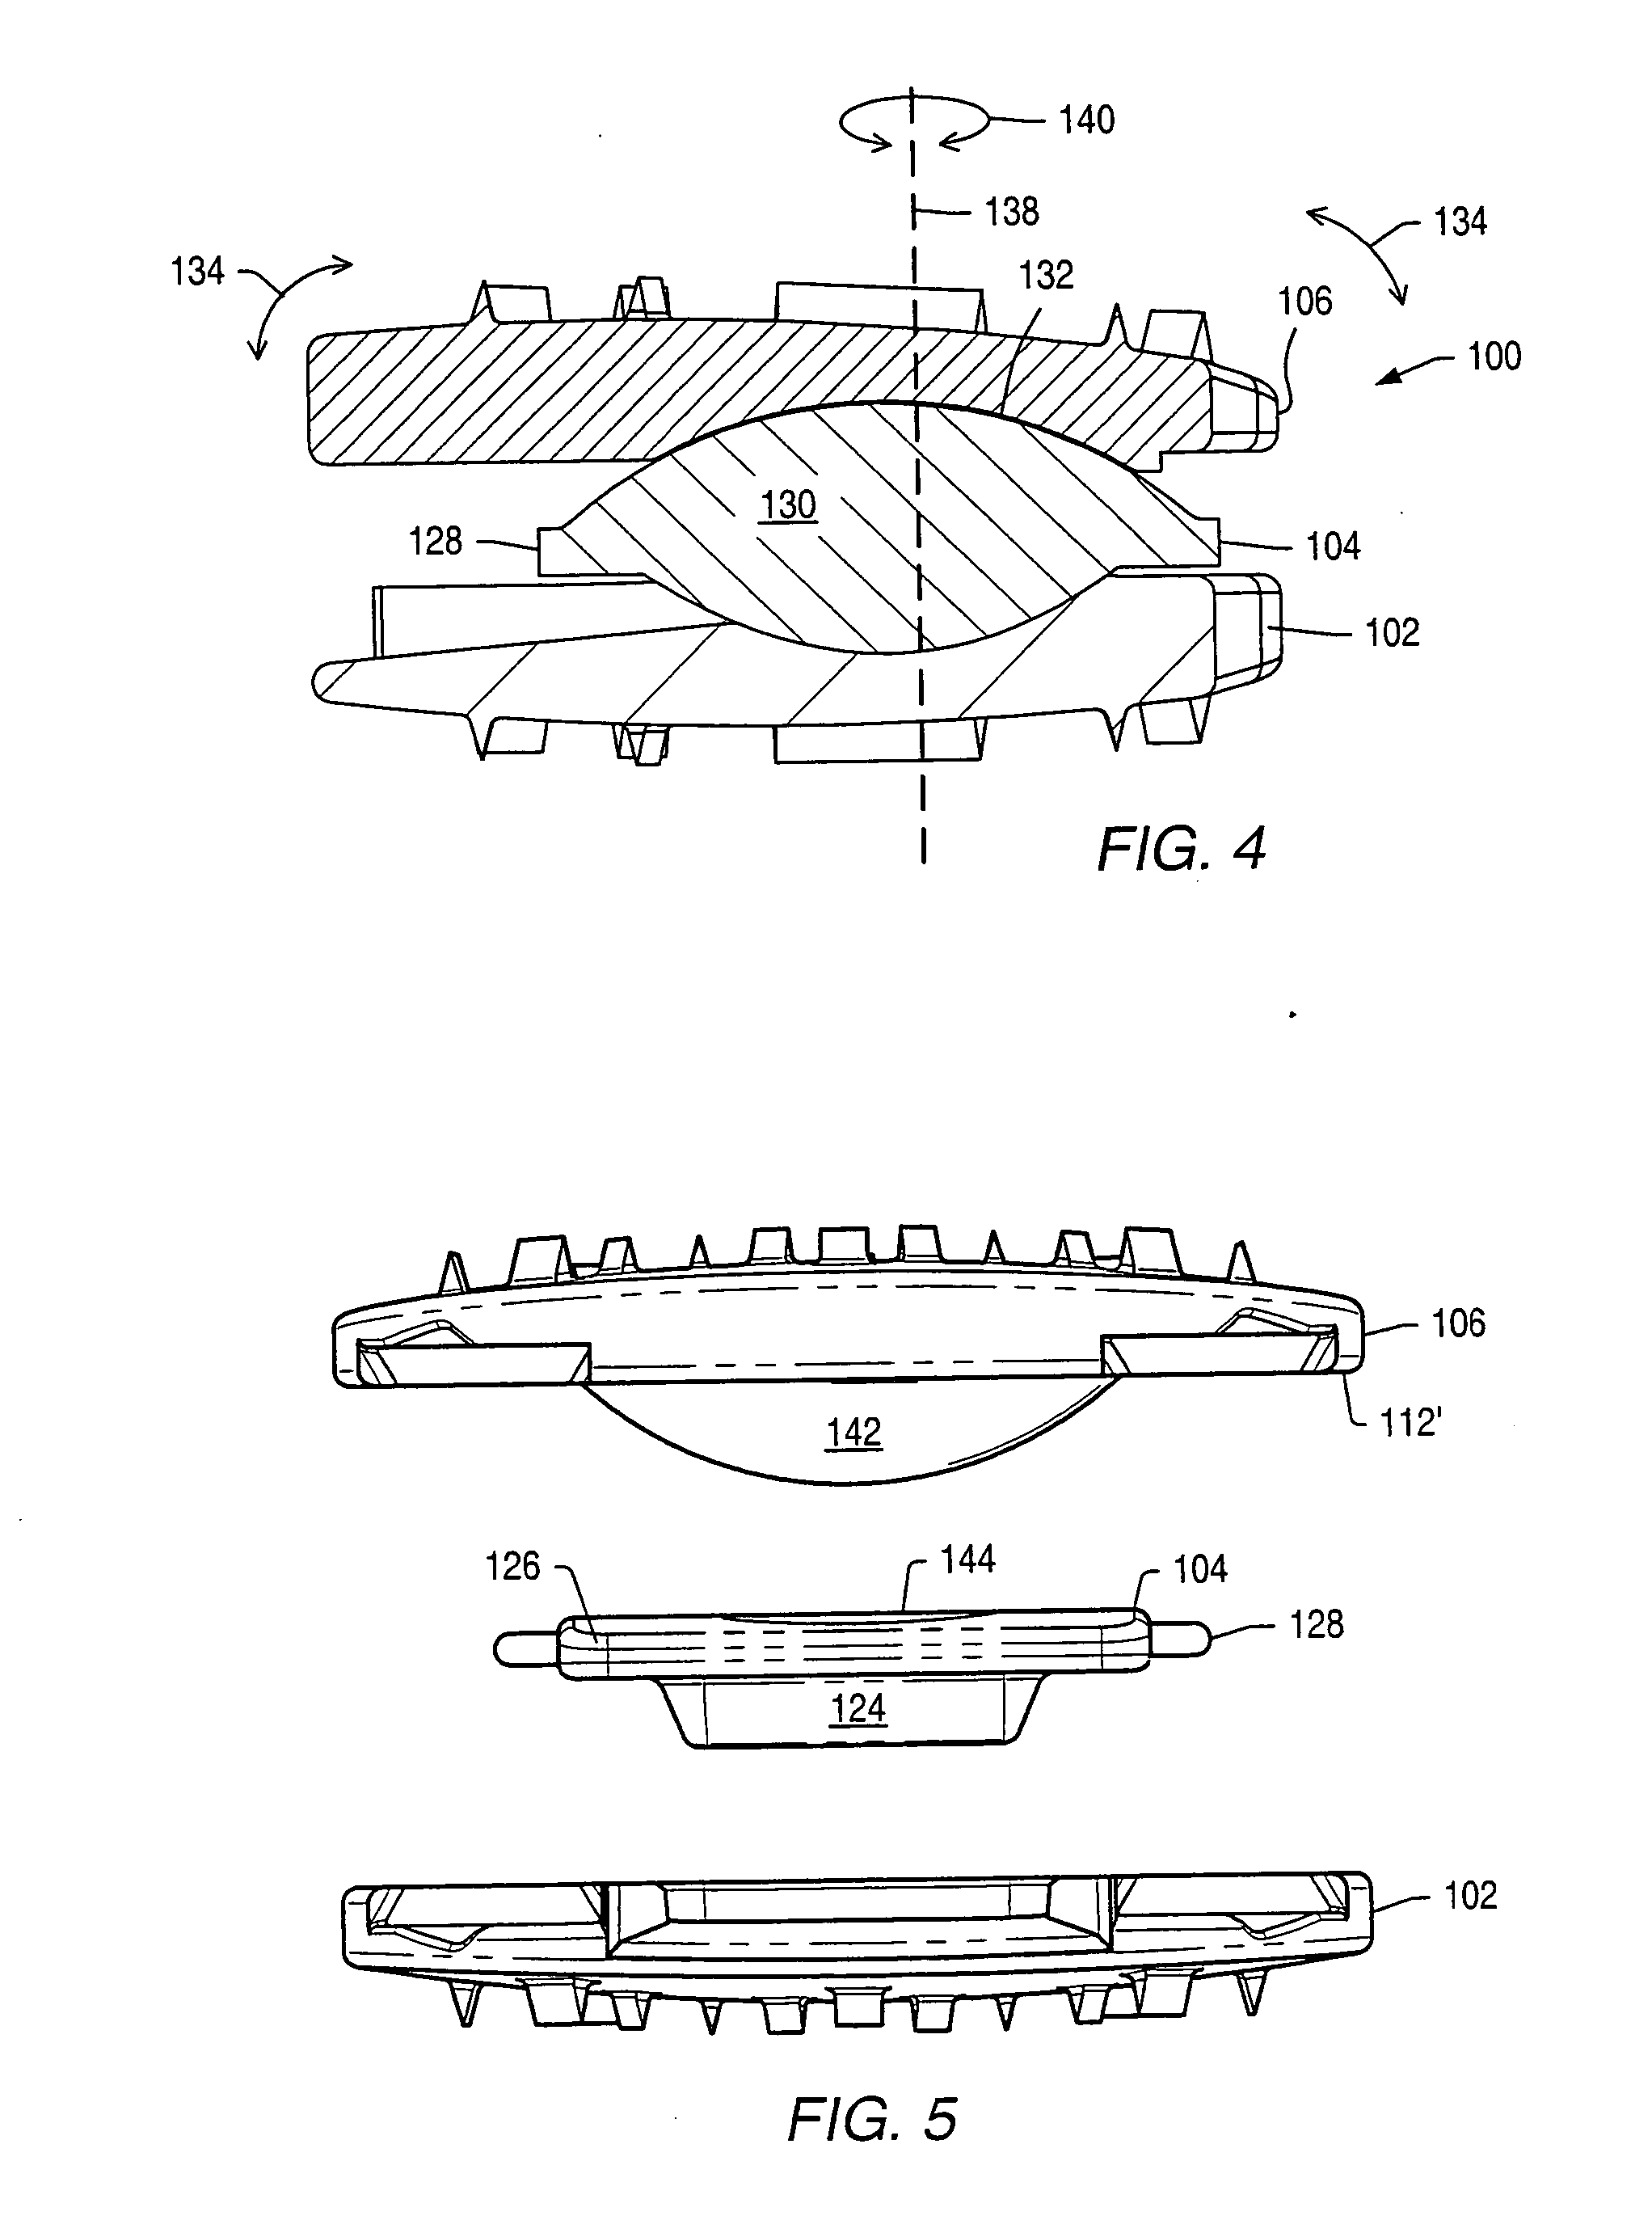 Movable disc implant